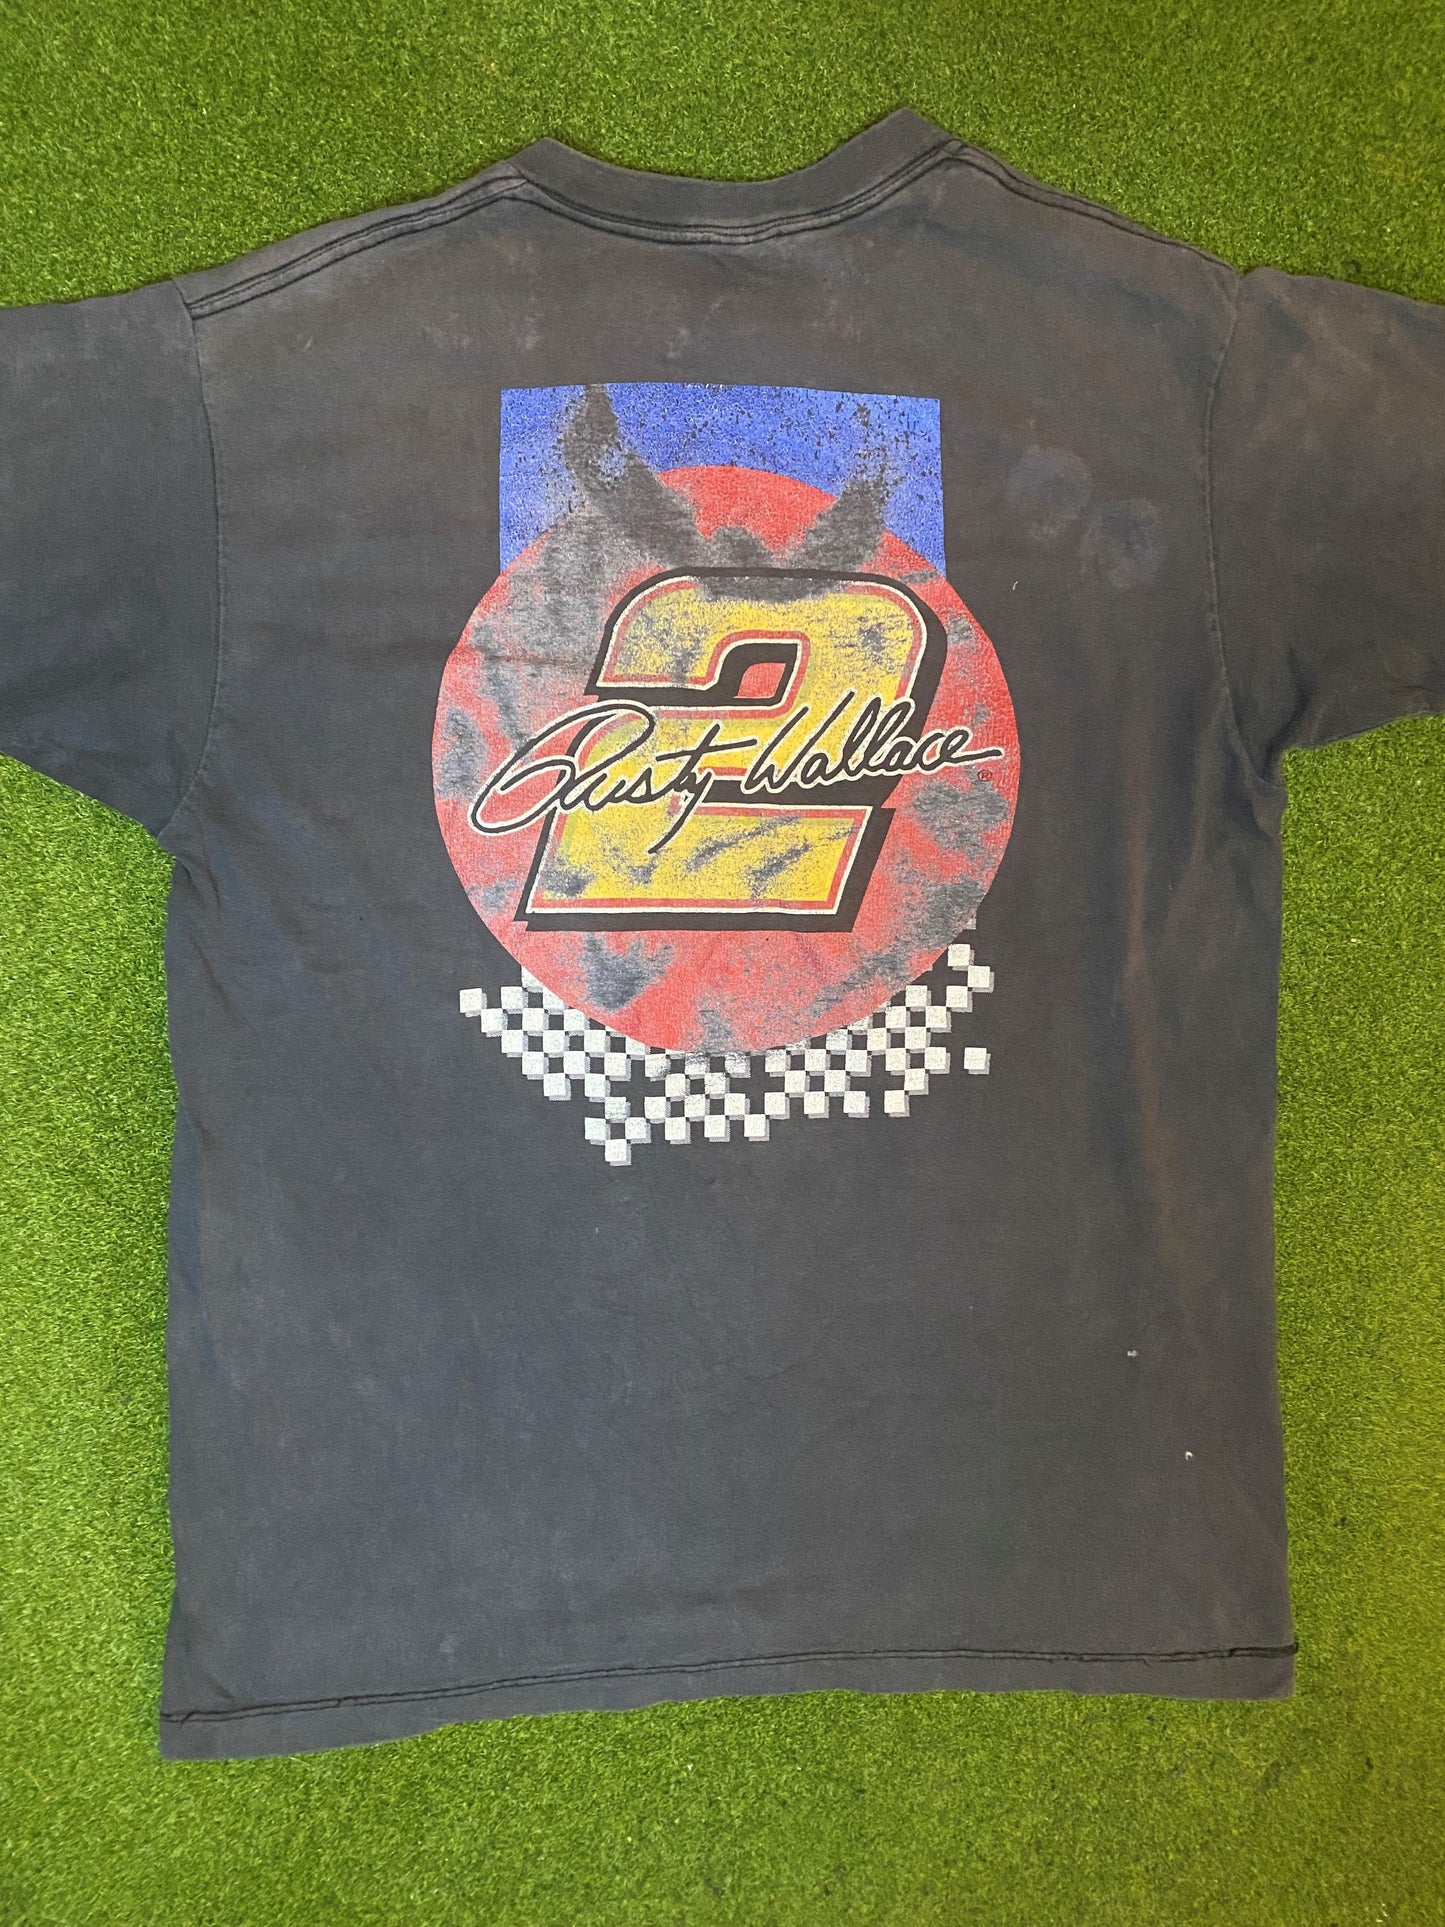 90s Rusty Wallace - Double Sided - Vintage NASCAR T-Shirt (Large)